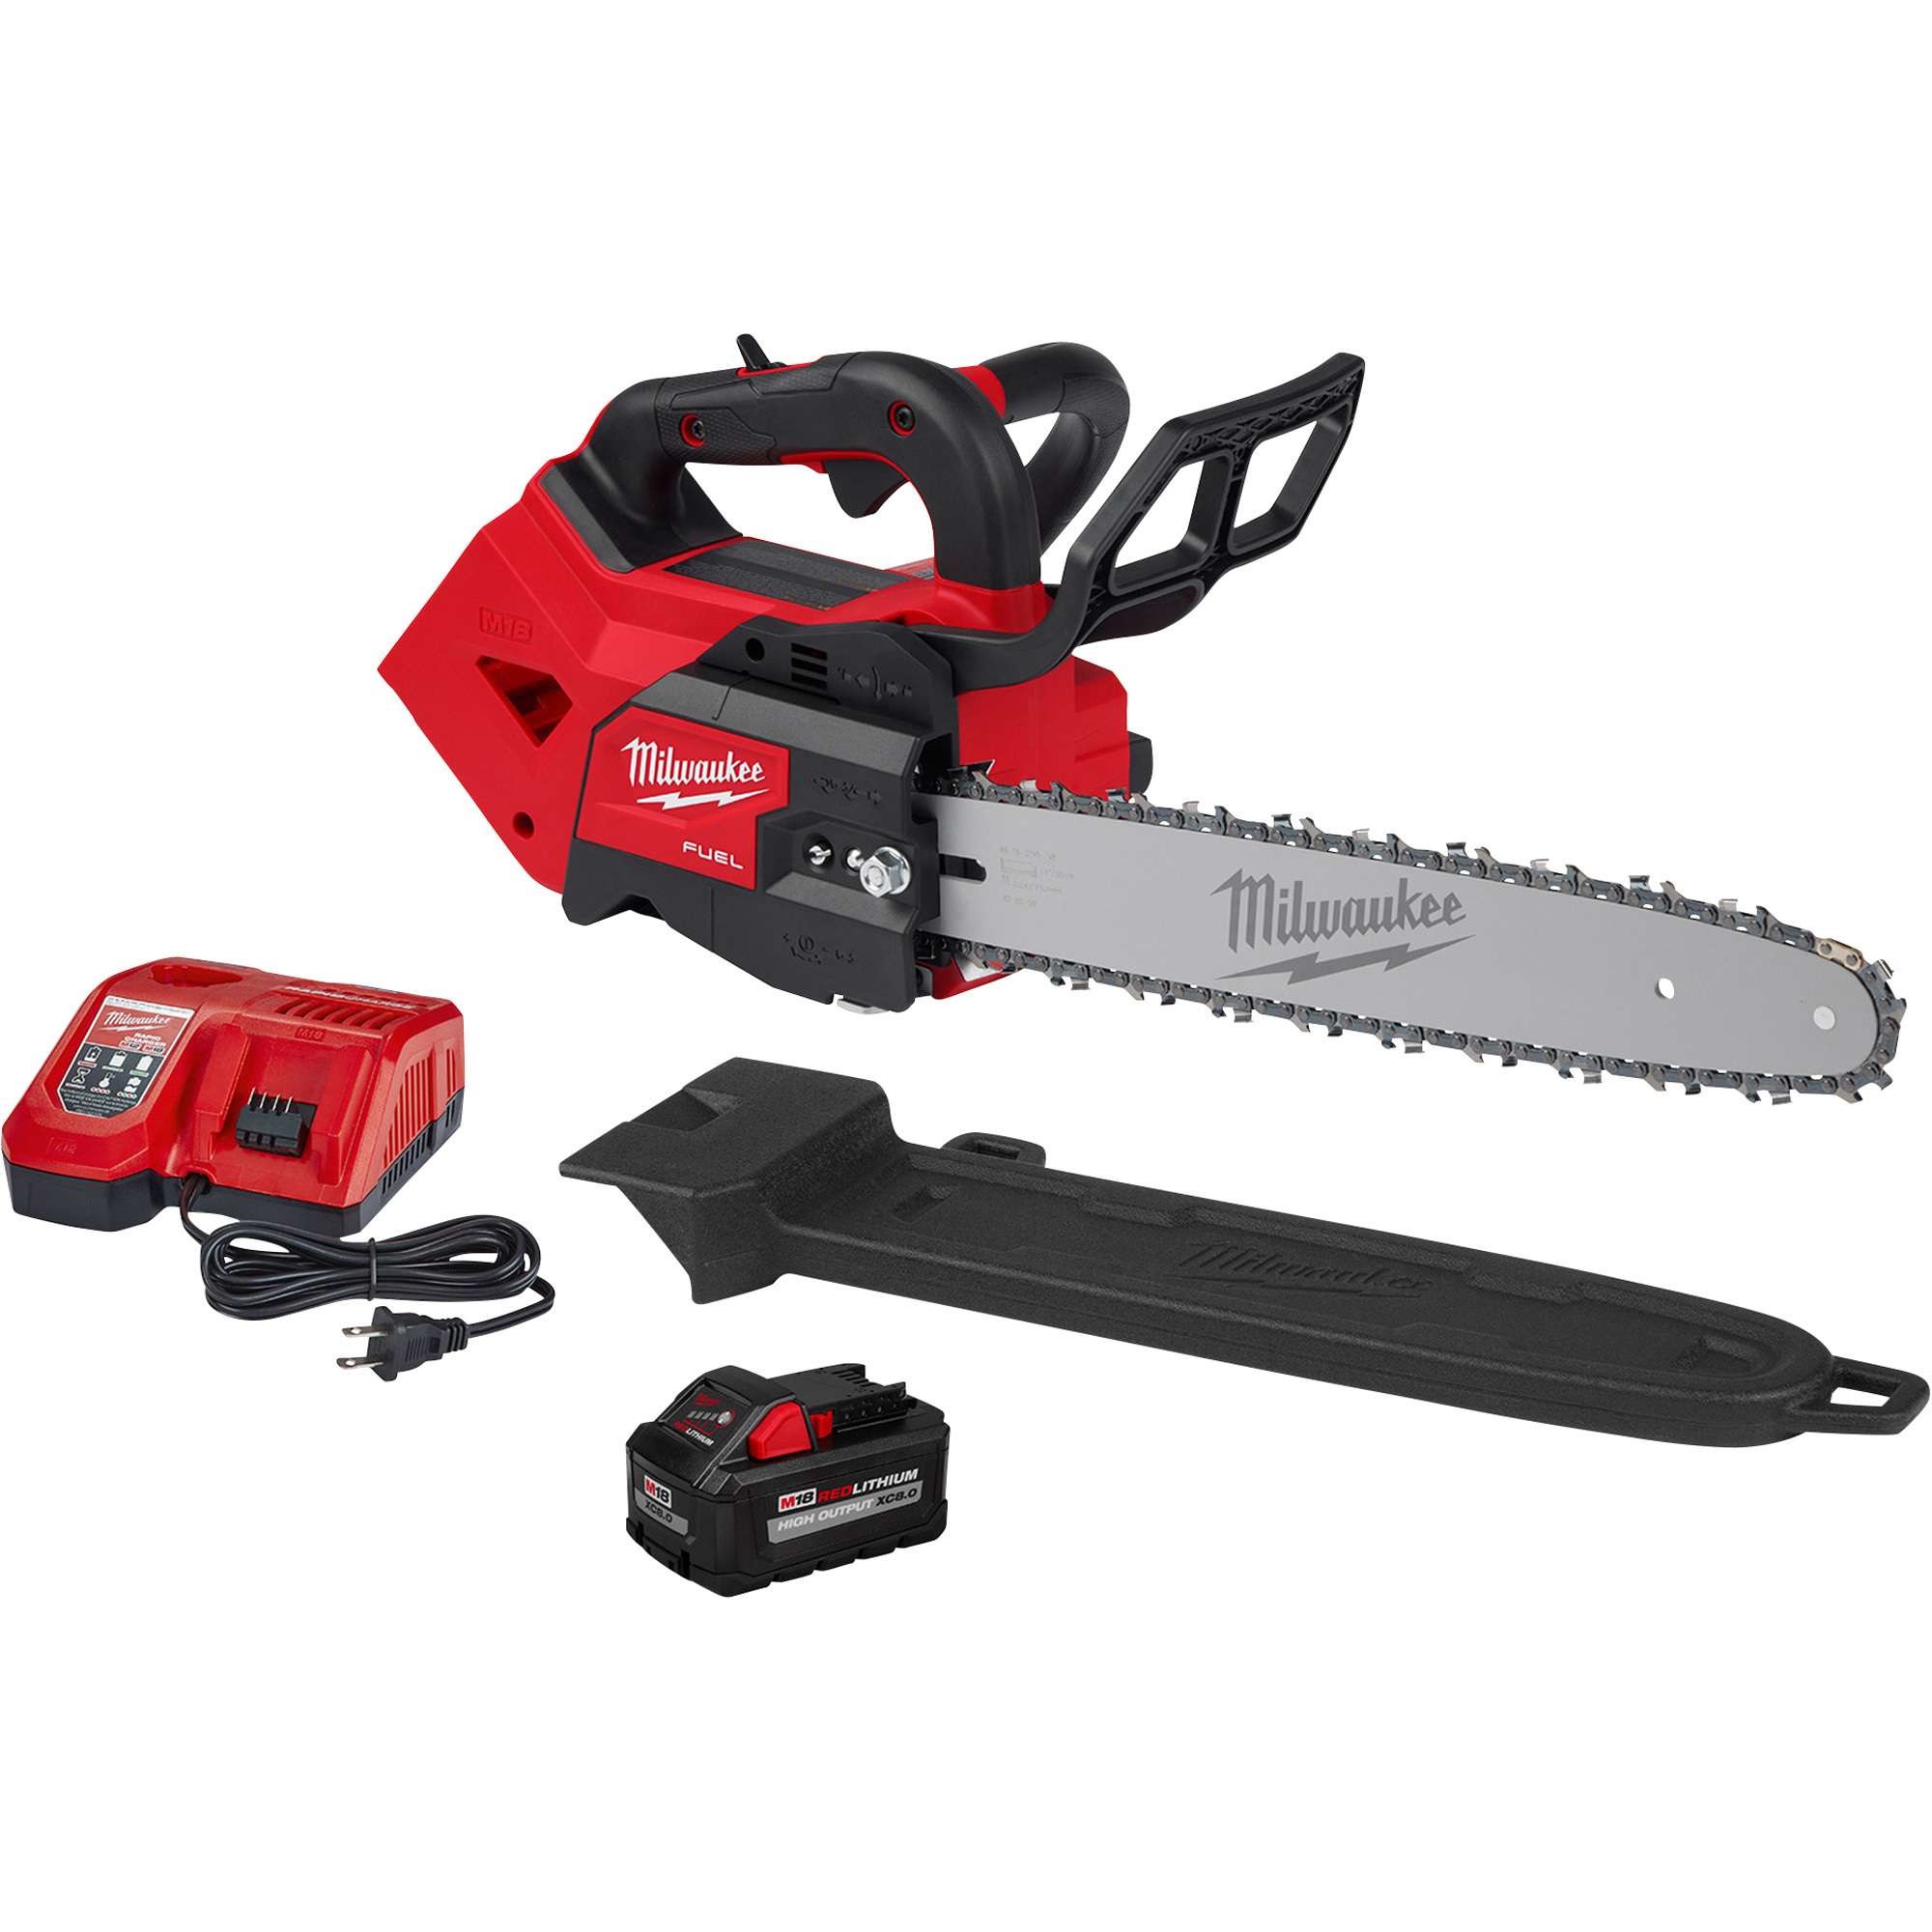 Milwaukee M18 FUEL Top Handle Chainsaw Kit, 14Inch Bar, 8.0 Ah Lithium-Ion Battery and Charger, Model 2826-21T